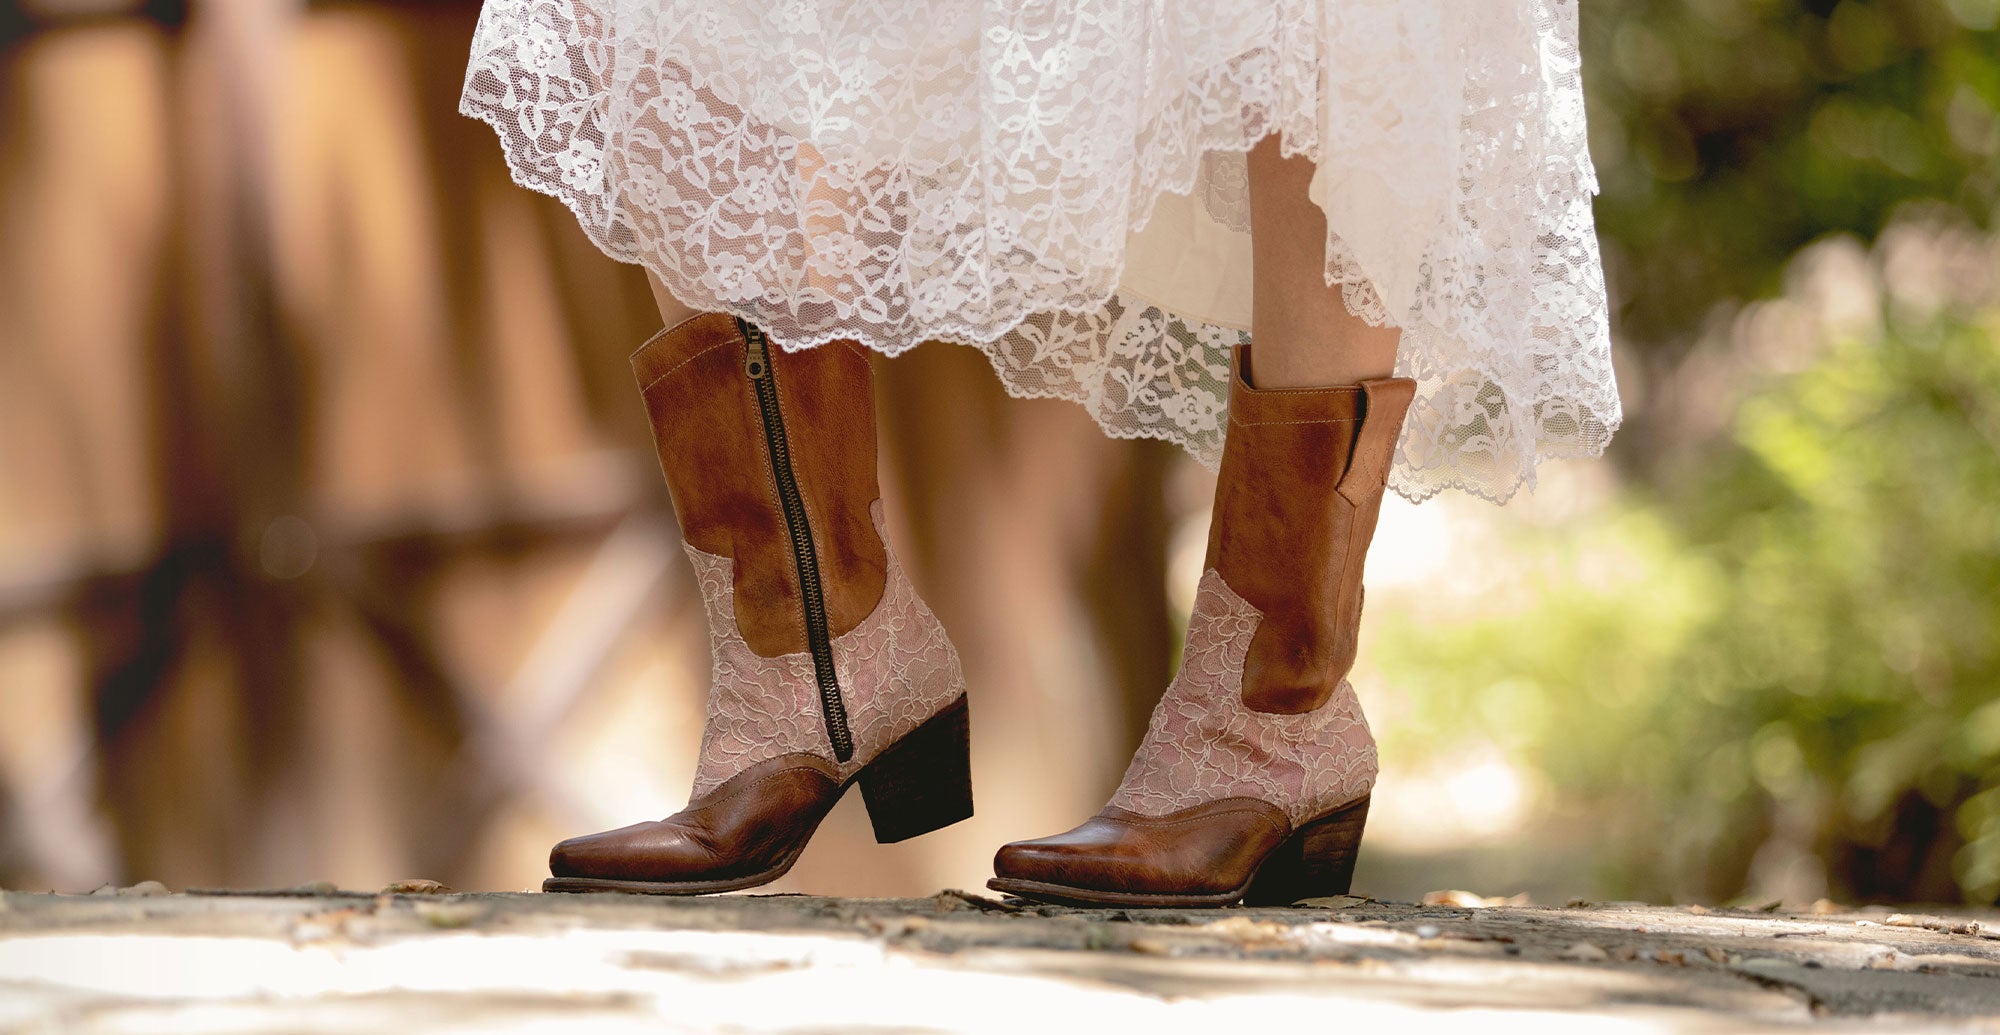 A woman wearing a white dress and brown boots.